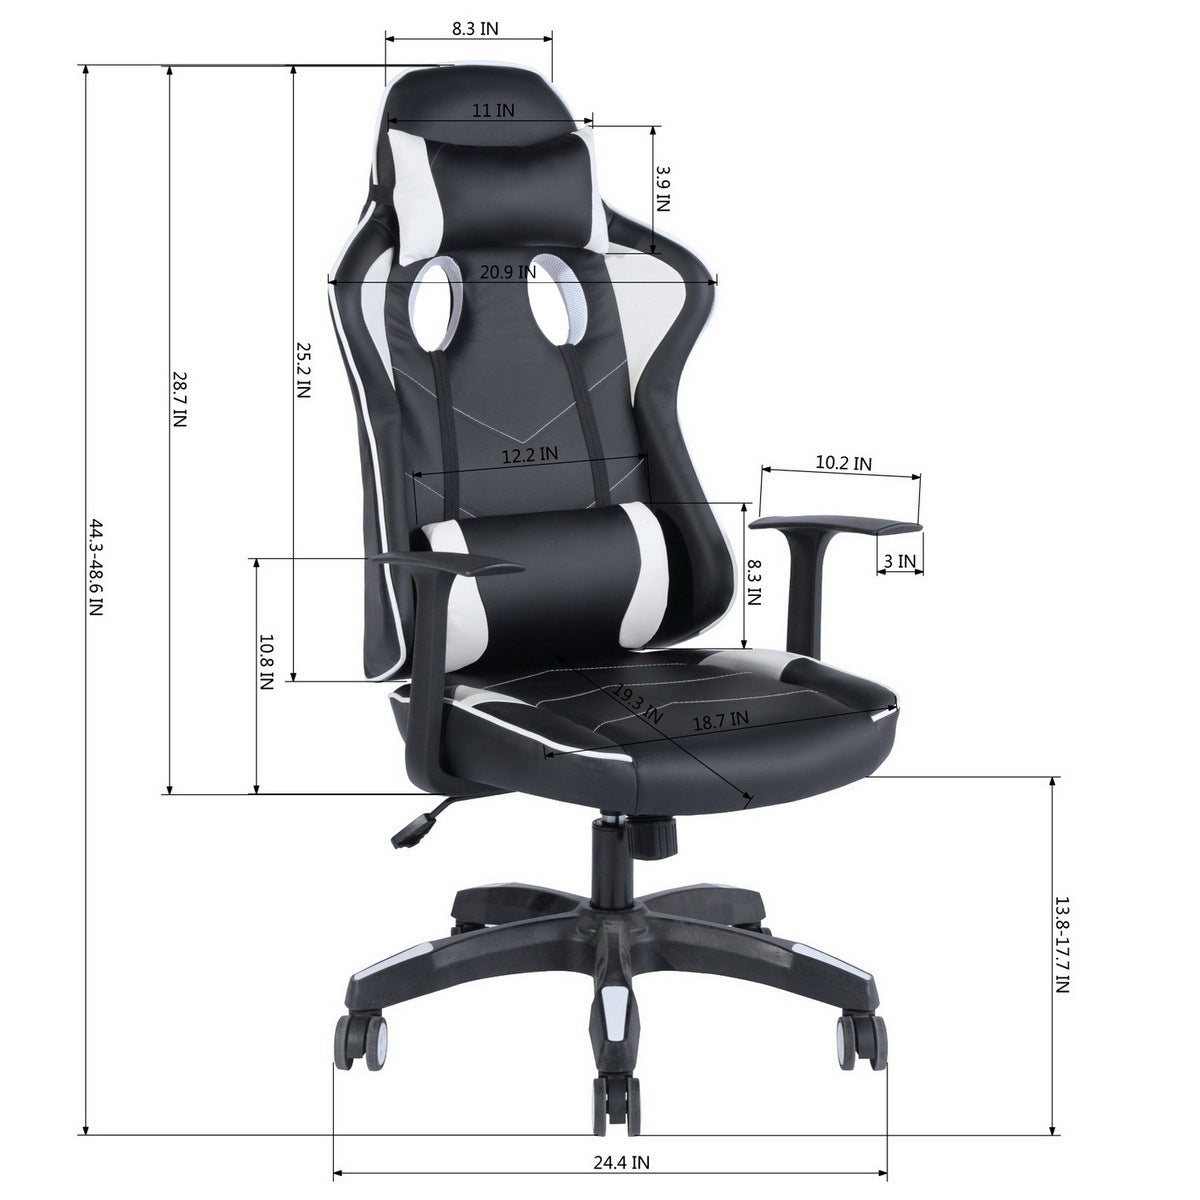 Gaming Office Chair with Upholstered PU Adjustable Swivel (Black/White)